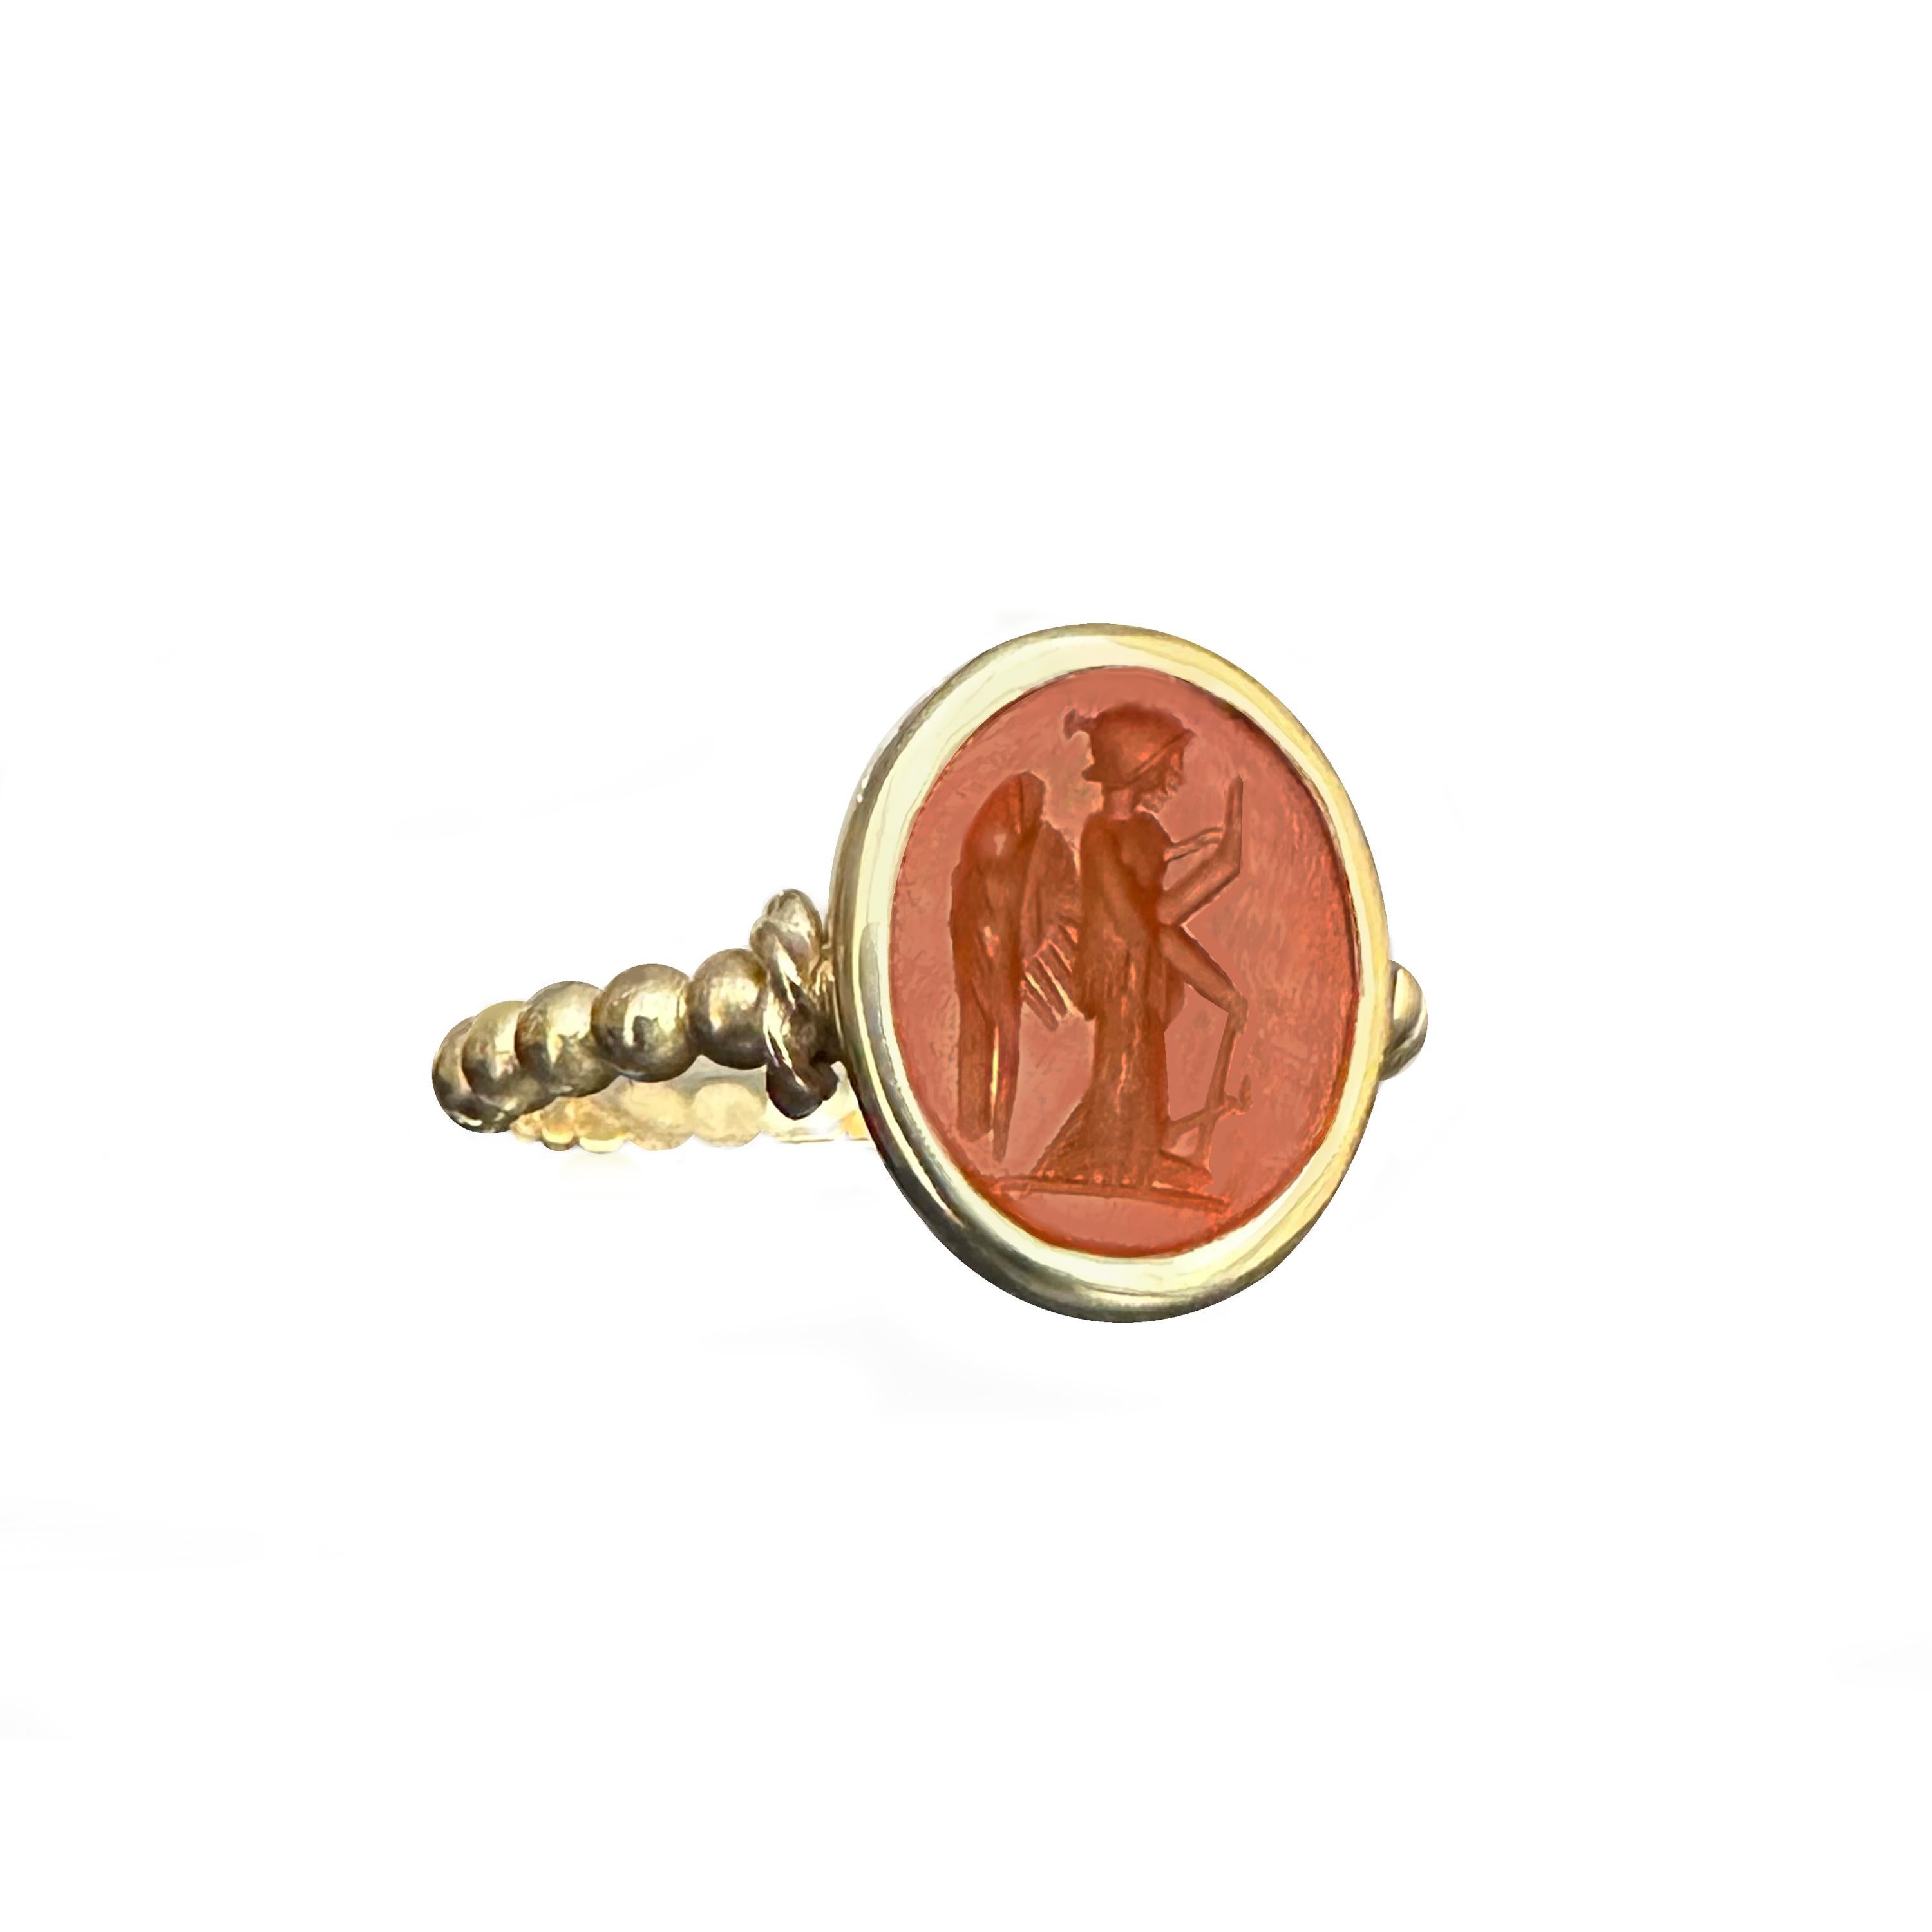 Crafted with precision in 18 kt gold by our skilled artisans, this captivating ring features an ancient Roman carnelian intaglio, a relic dating back to the 1st-2nd century AD.

Engraved within is the resplendent Goddess Athena, donning her